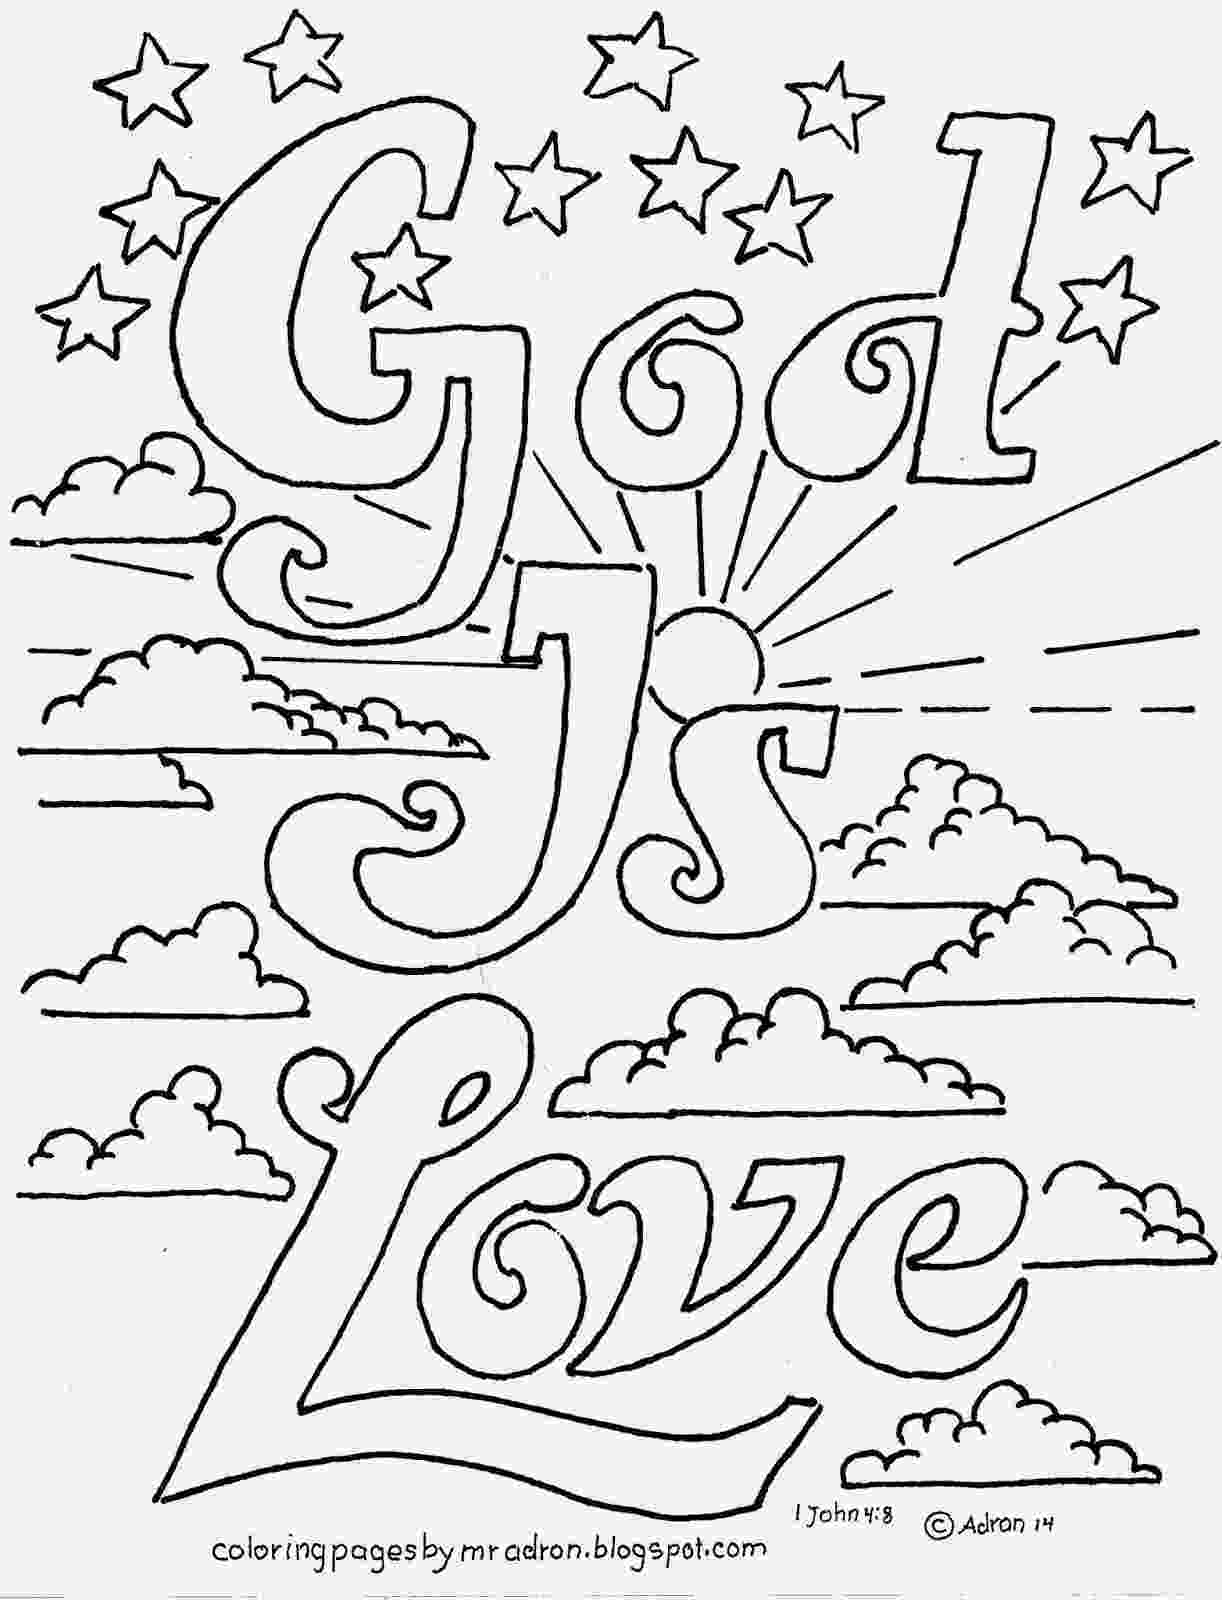 love coloring pages printable t love colouring pages paint fun bird coloring pages coloring love pages printable 